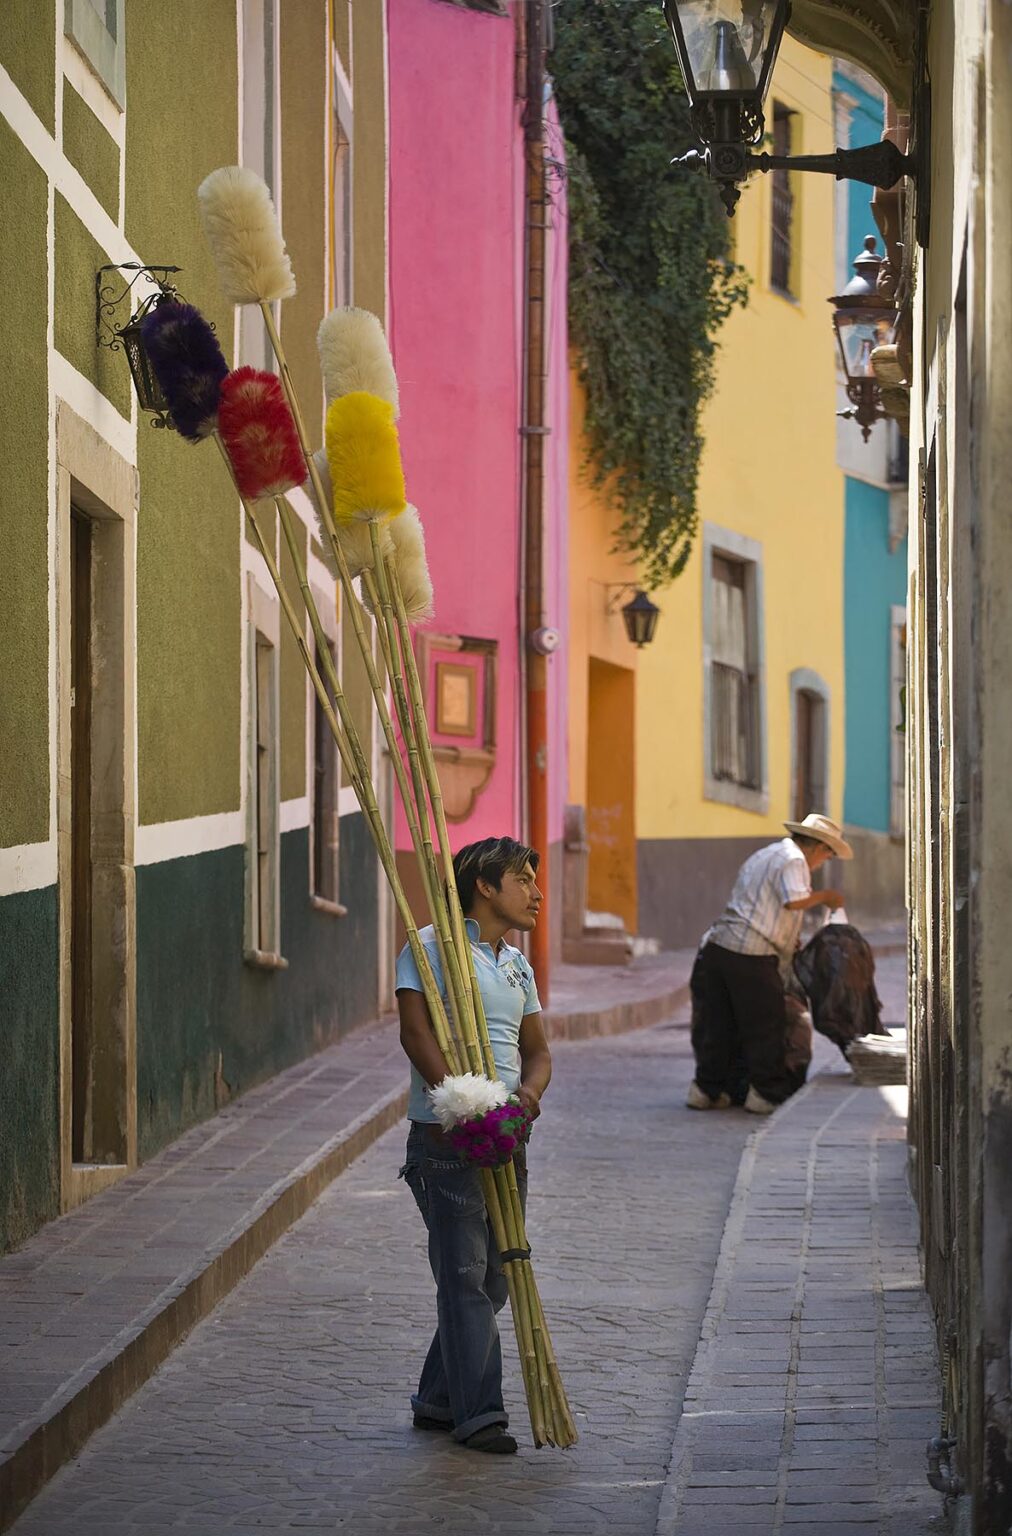 A street VENDOR sells DUSTERS door to door in the colorful and historic town of GUANAJUATO, MEXICO